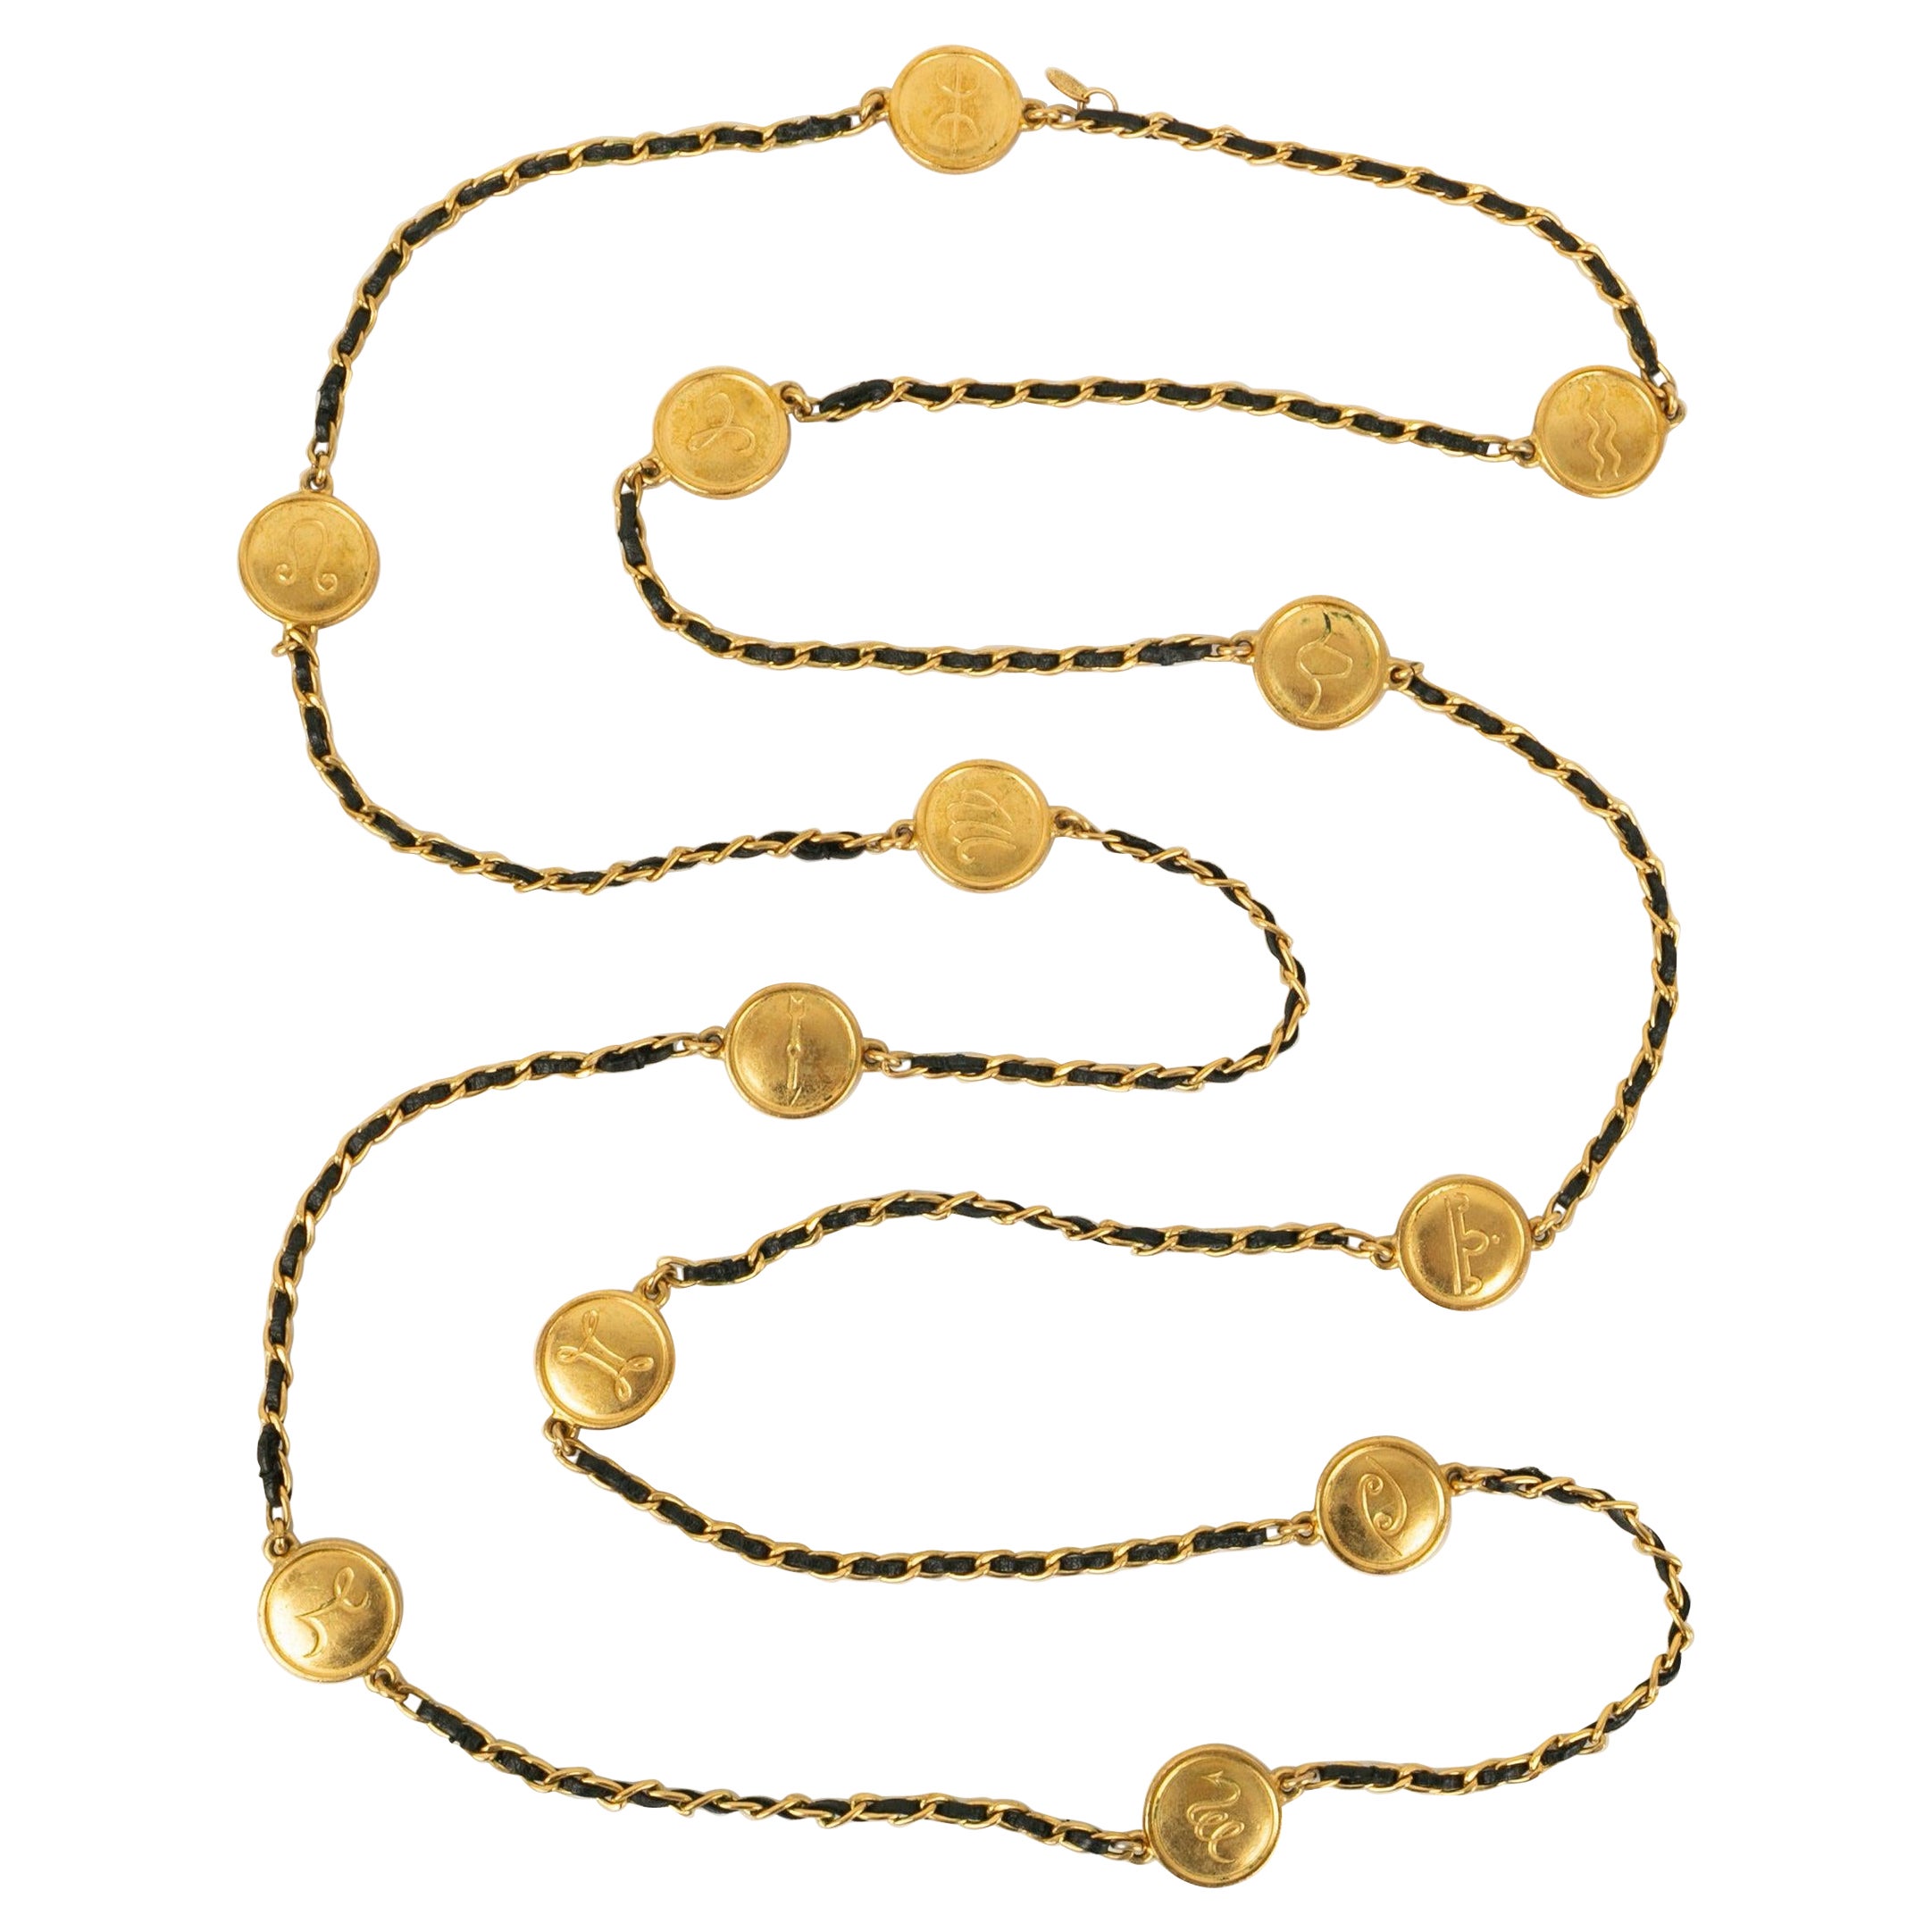 Chanel Necklace / Sautoir in Gold-Plated Metal, 1995 For Sale